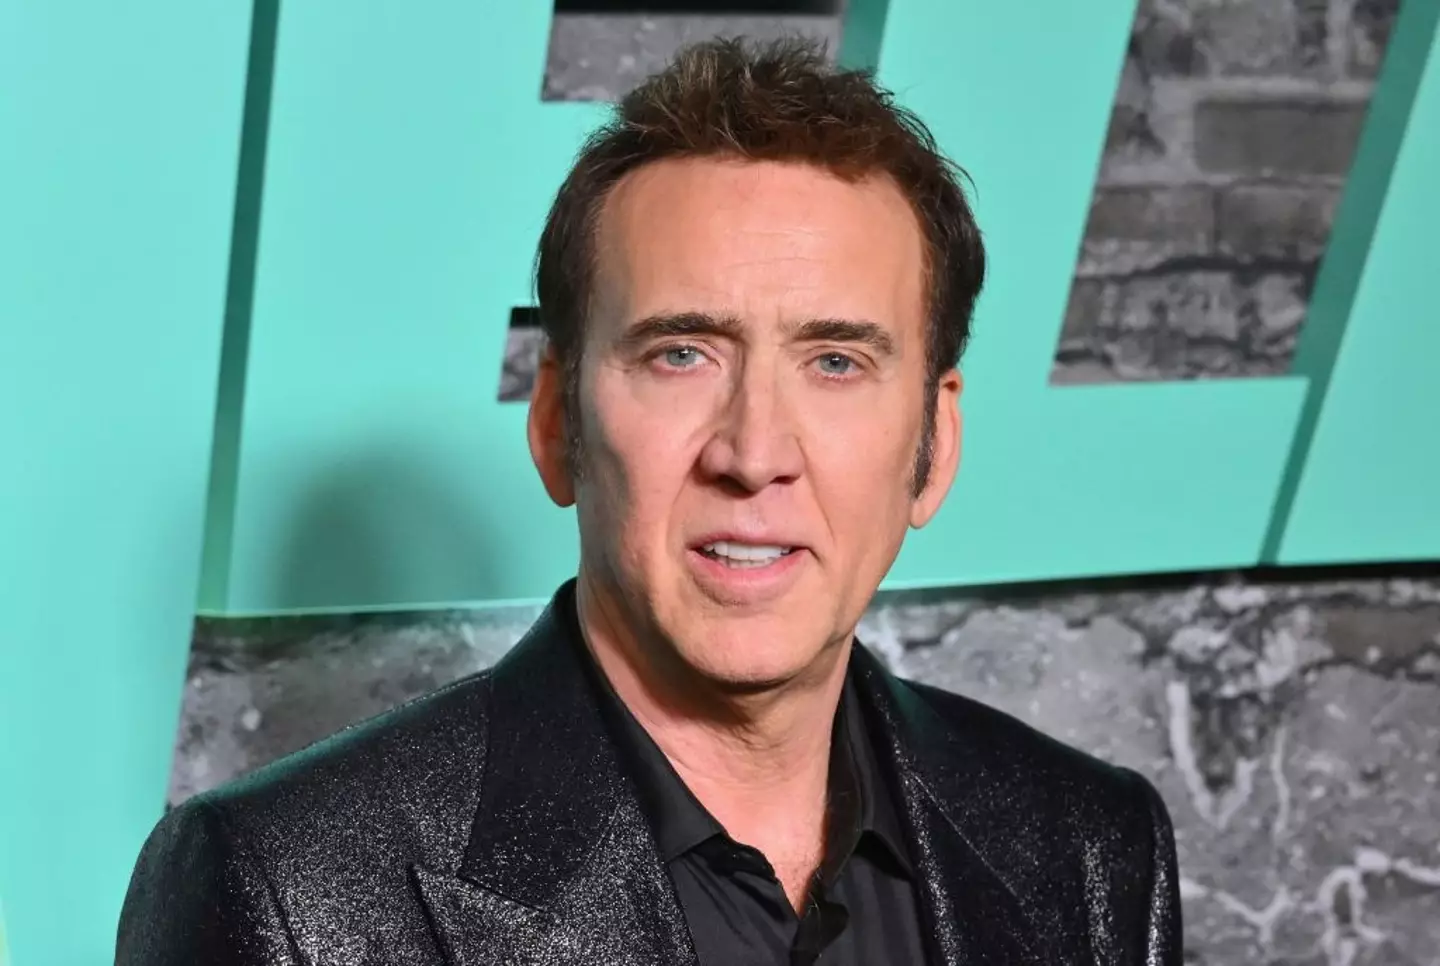 Cage has instead suggested that he plans to do more television.